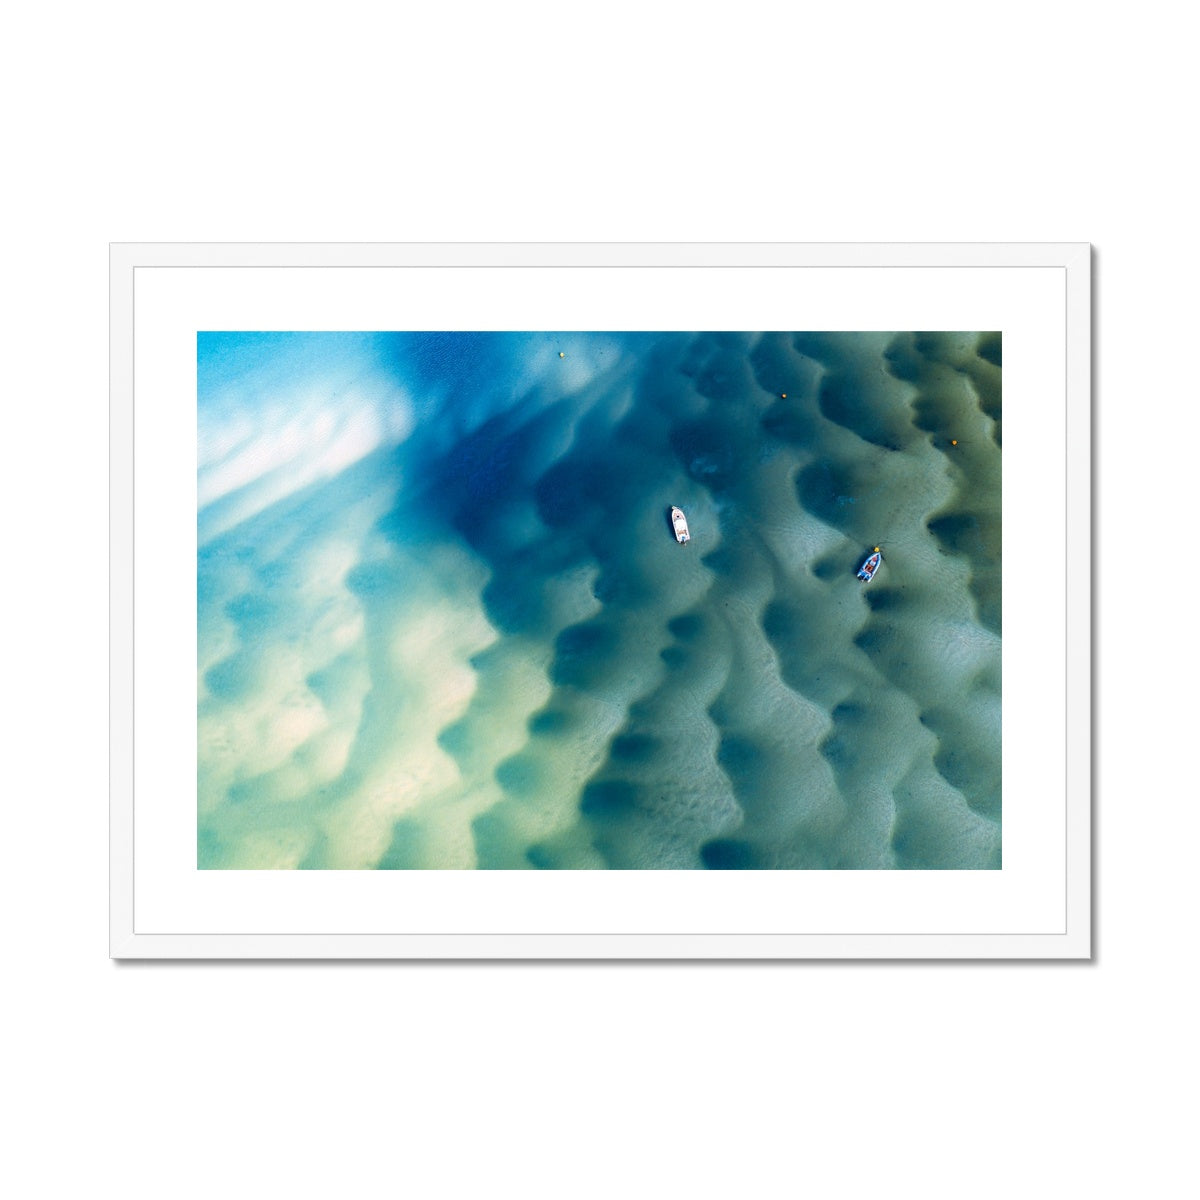 padstow ripples white frame